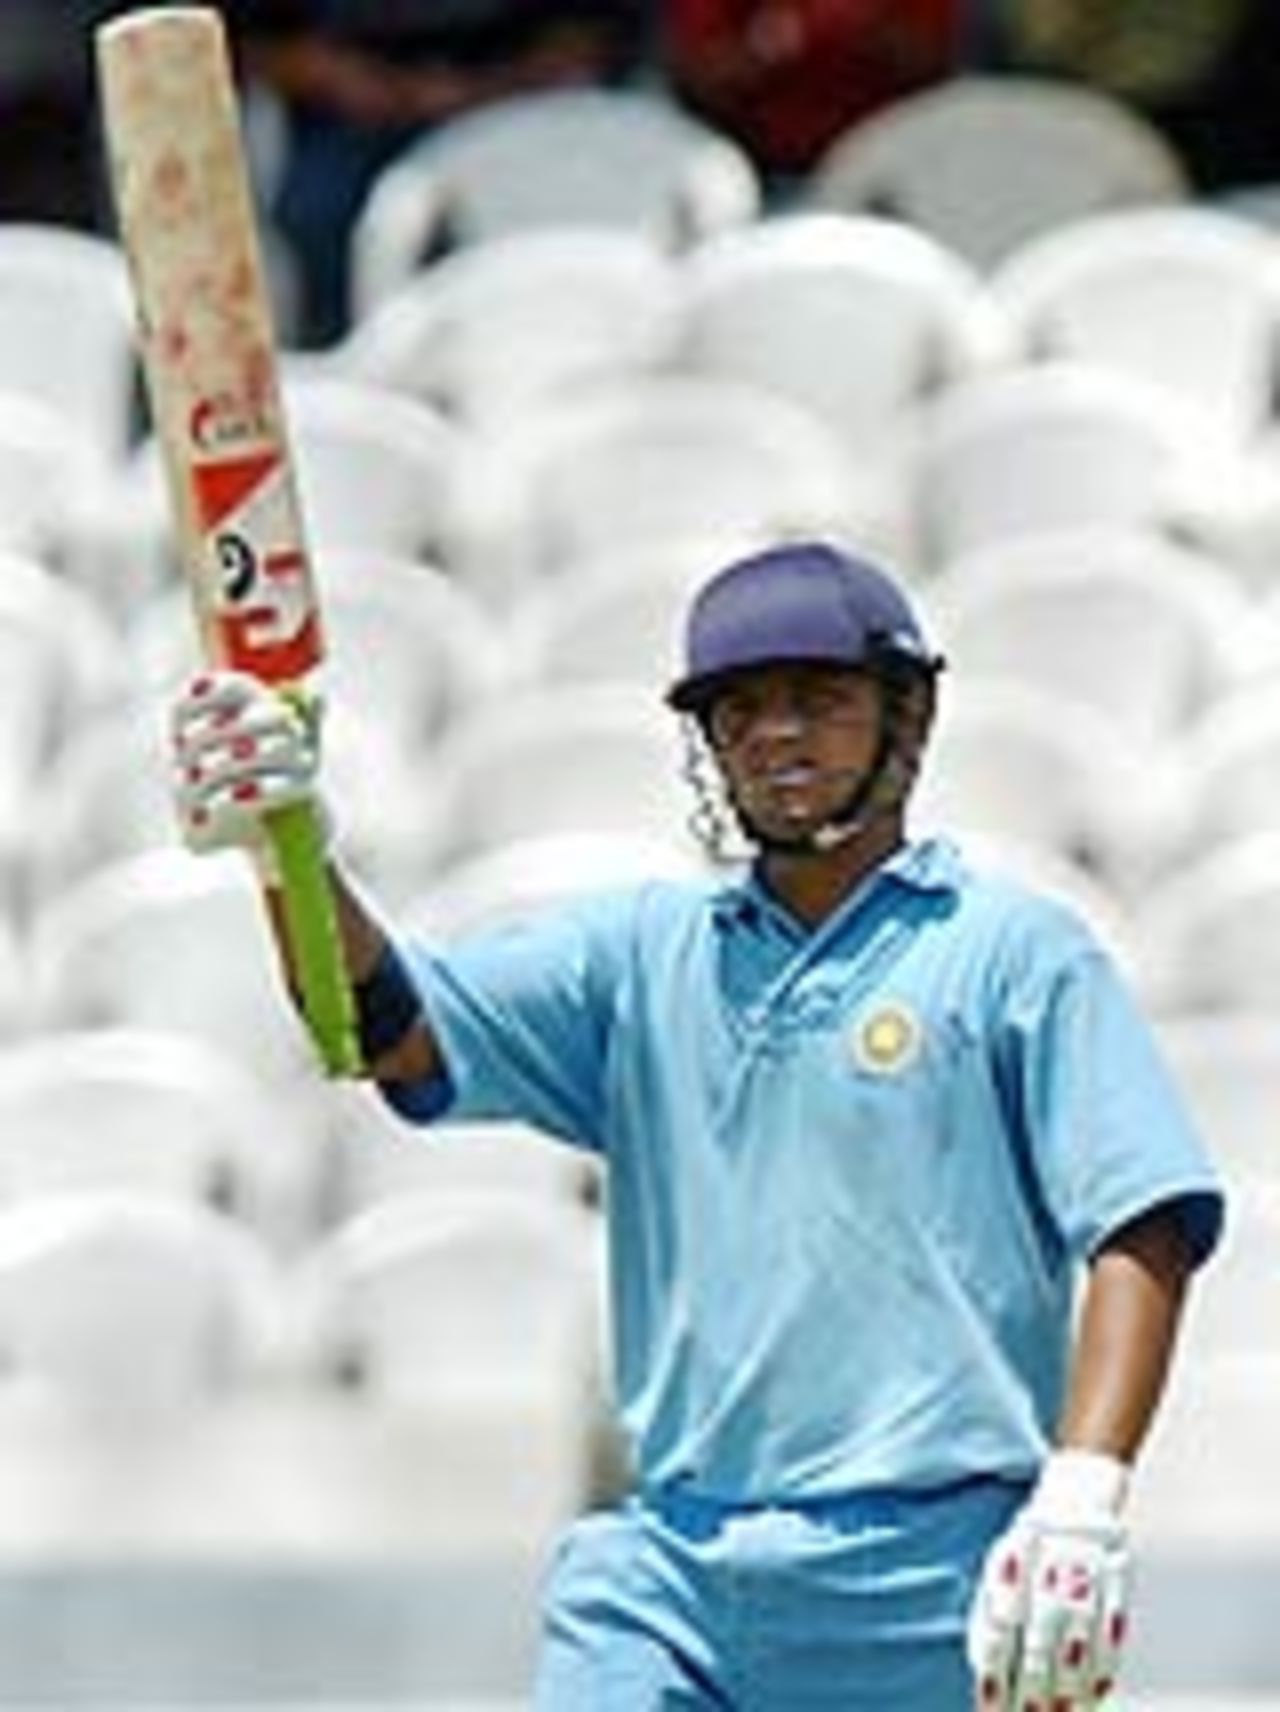 Suresh Raina raises his bat after reaching his fifty in Pakistan's warm-up against India A, Hyderabad, March 30, 2005